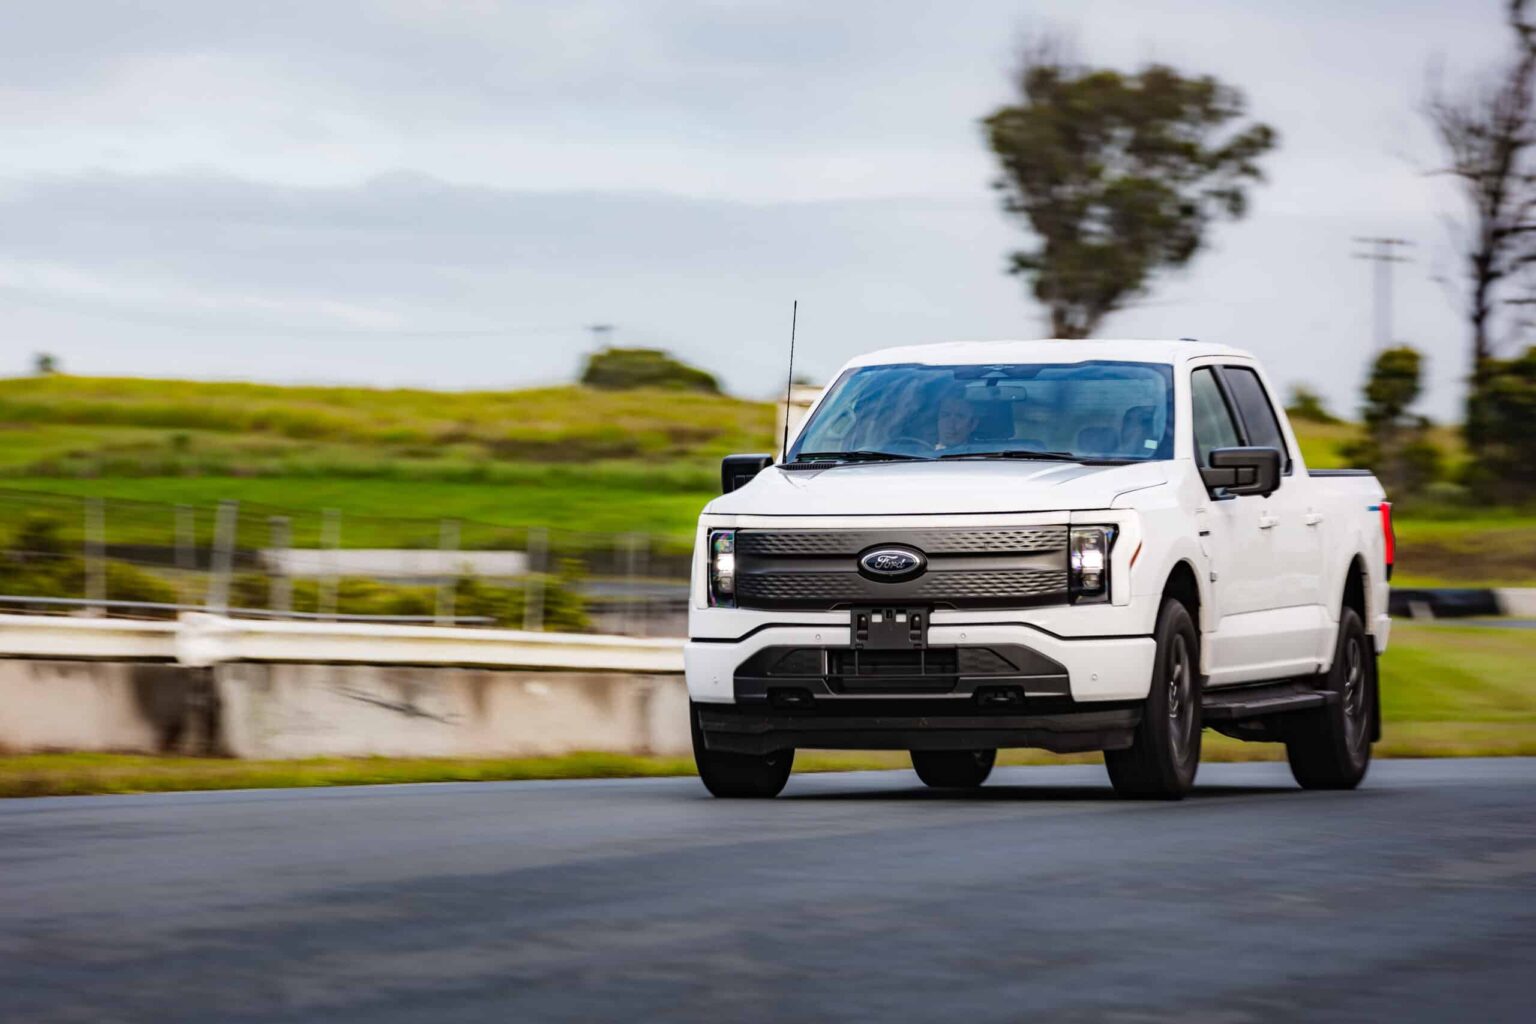 AUSEV - A white Ford F-150 Lightning truck driving on a road with a blurred green landscape in the background. The vehicle is motion-focused, accentuating its dynamic driving experience.